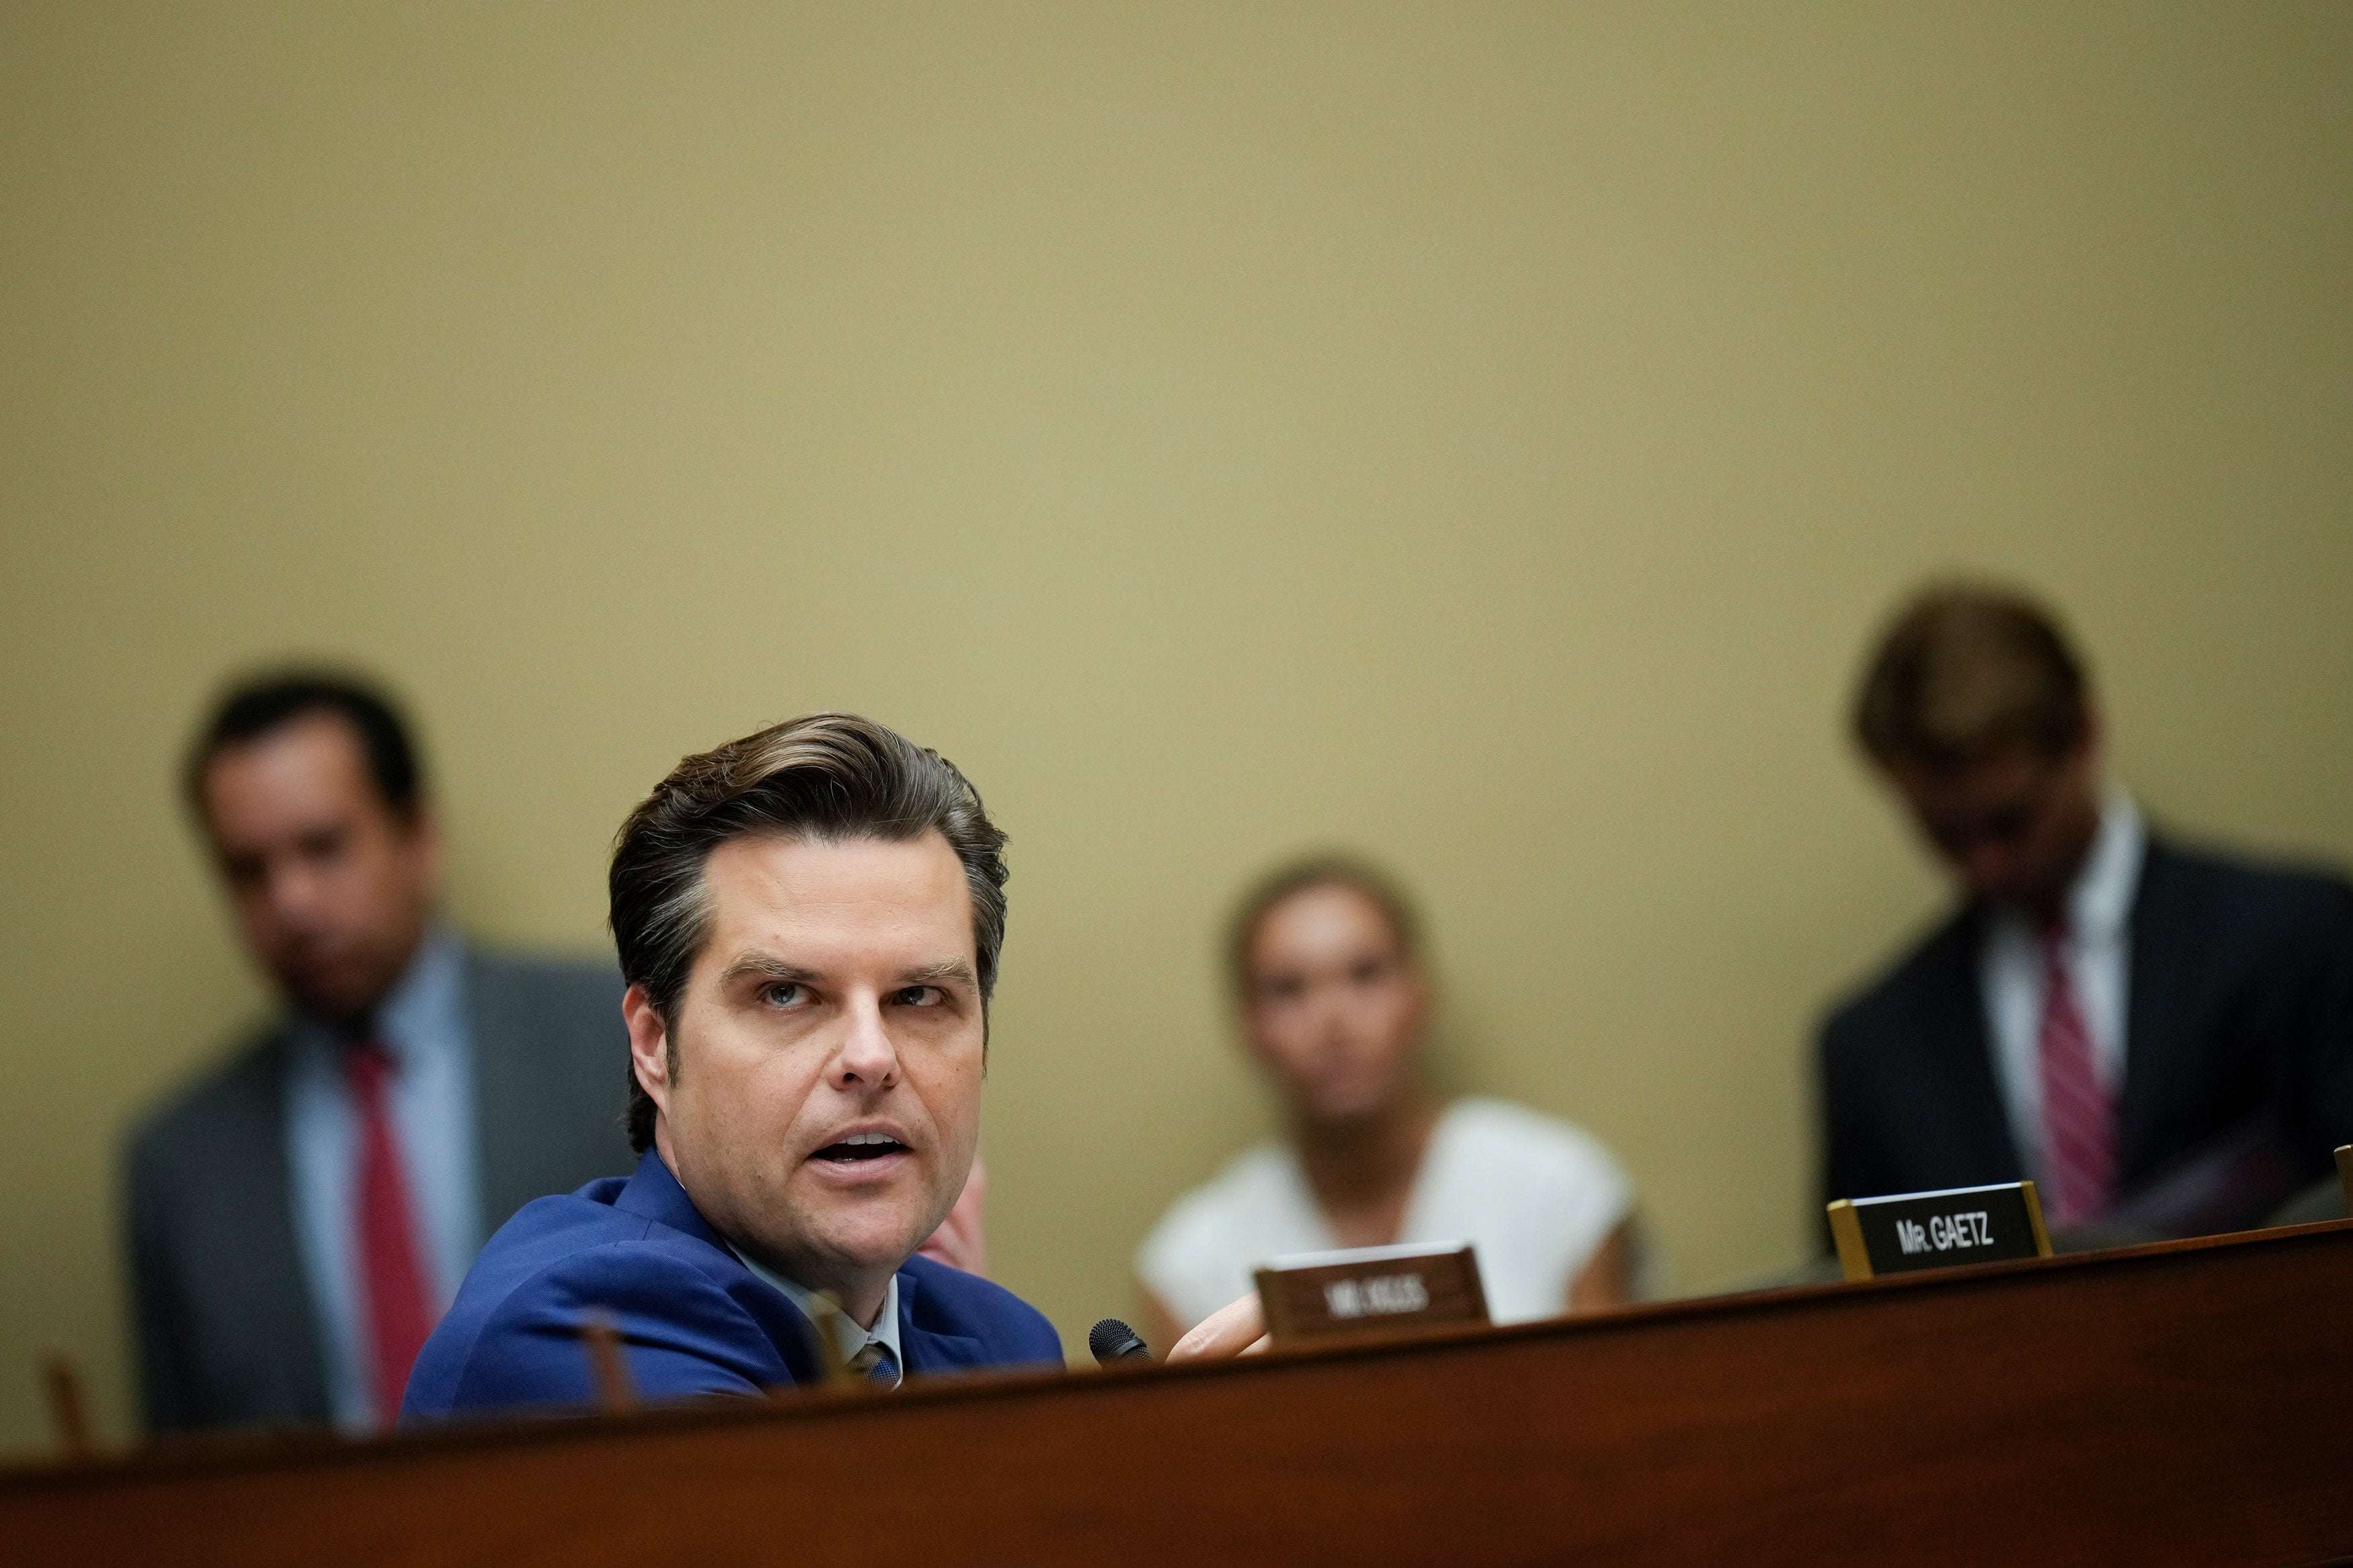 image for Matt Gaetz Confronted With Sex Doll During Fundraising Event